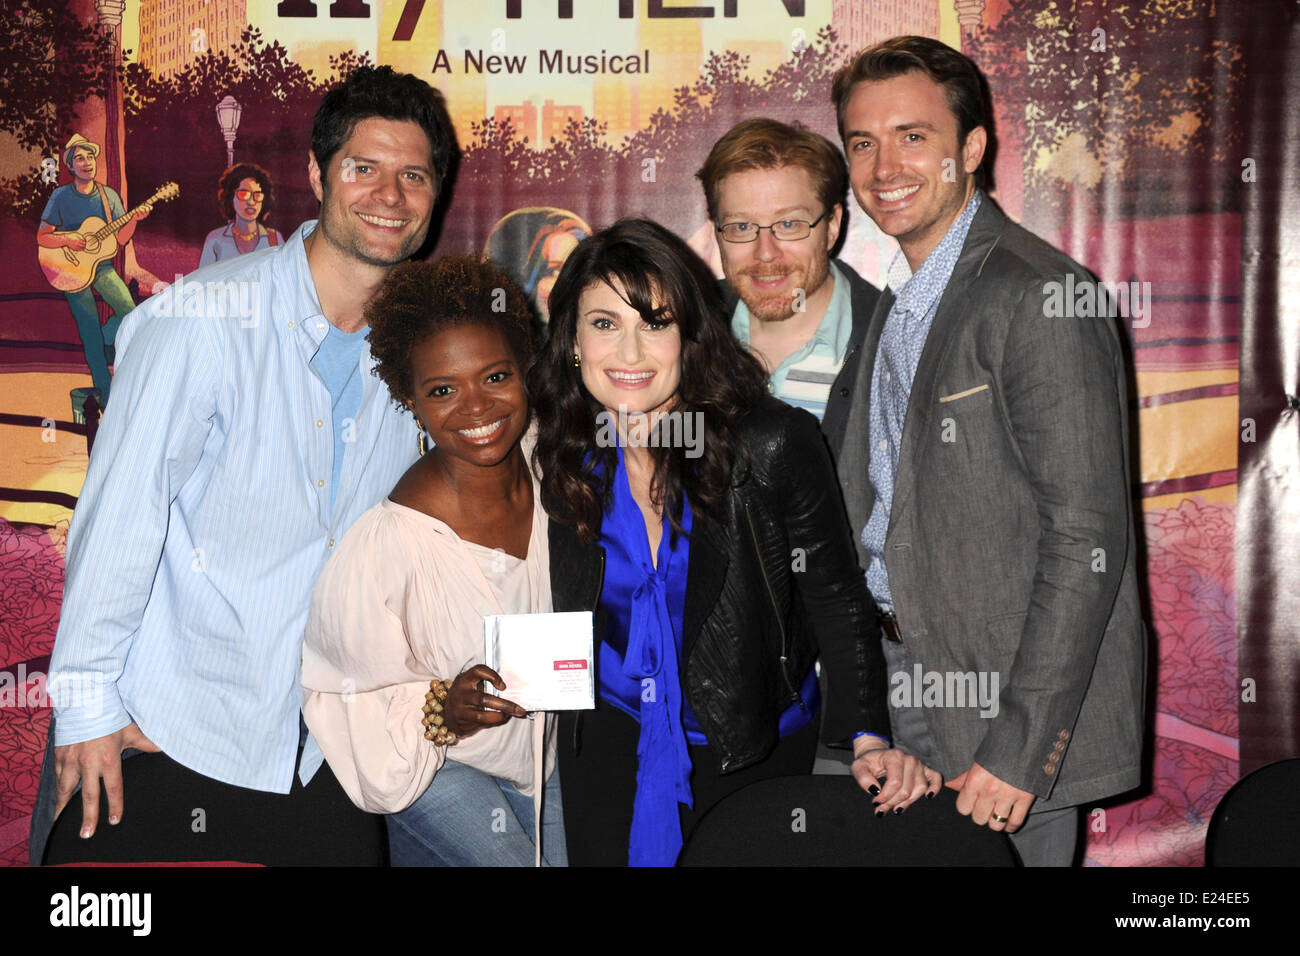 Tom Kitt, LaChanze, Idina Menzel, Anthony Rapp and James Snyder attend the 'If/Then' Broadway Cast CD Signing at the Sony Store on June 12, 2014 in New York City Stock Photo